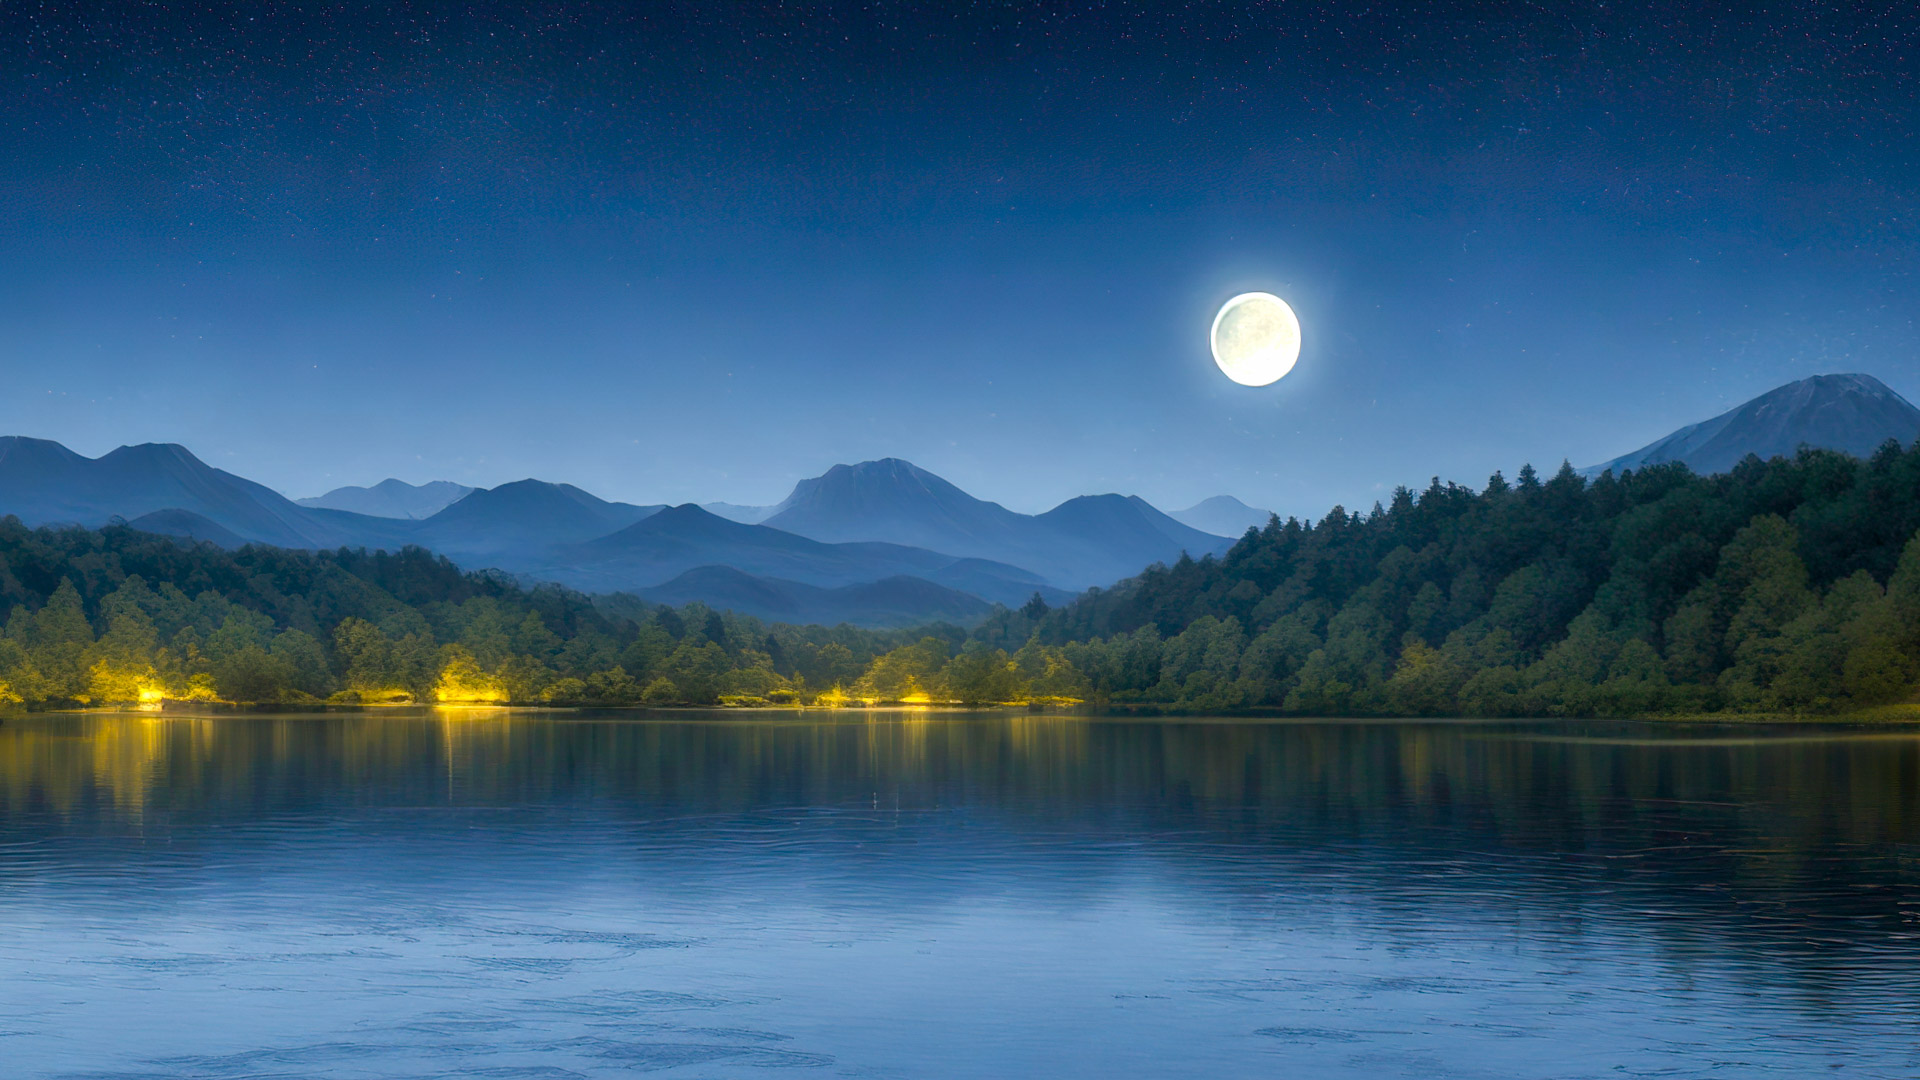 Transform your PC’s screen with our full HD, 1080p nature wallpaper, showcasing a serene and peaceful lakeside scene under a starry night sky, with a full moon reflecting on the water’s surface.